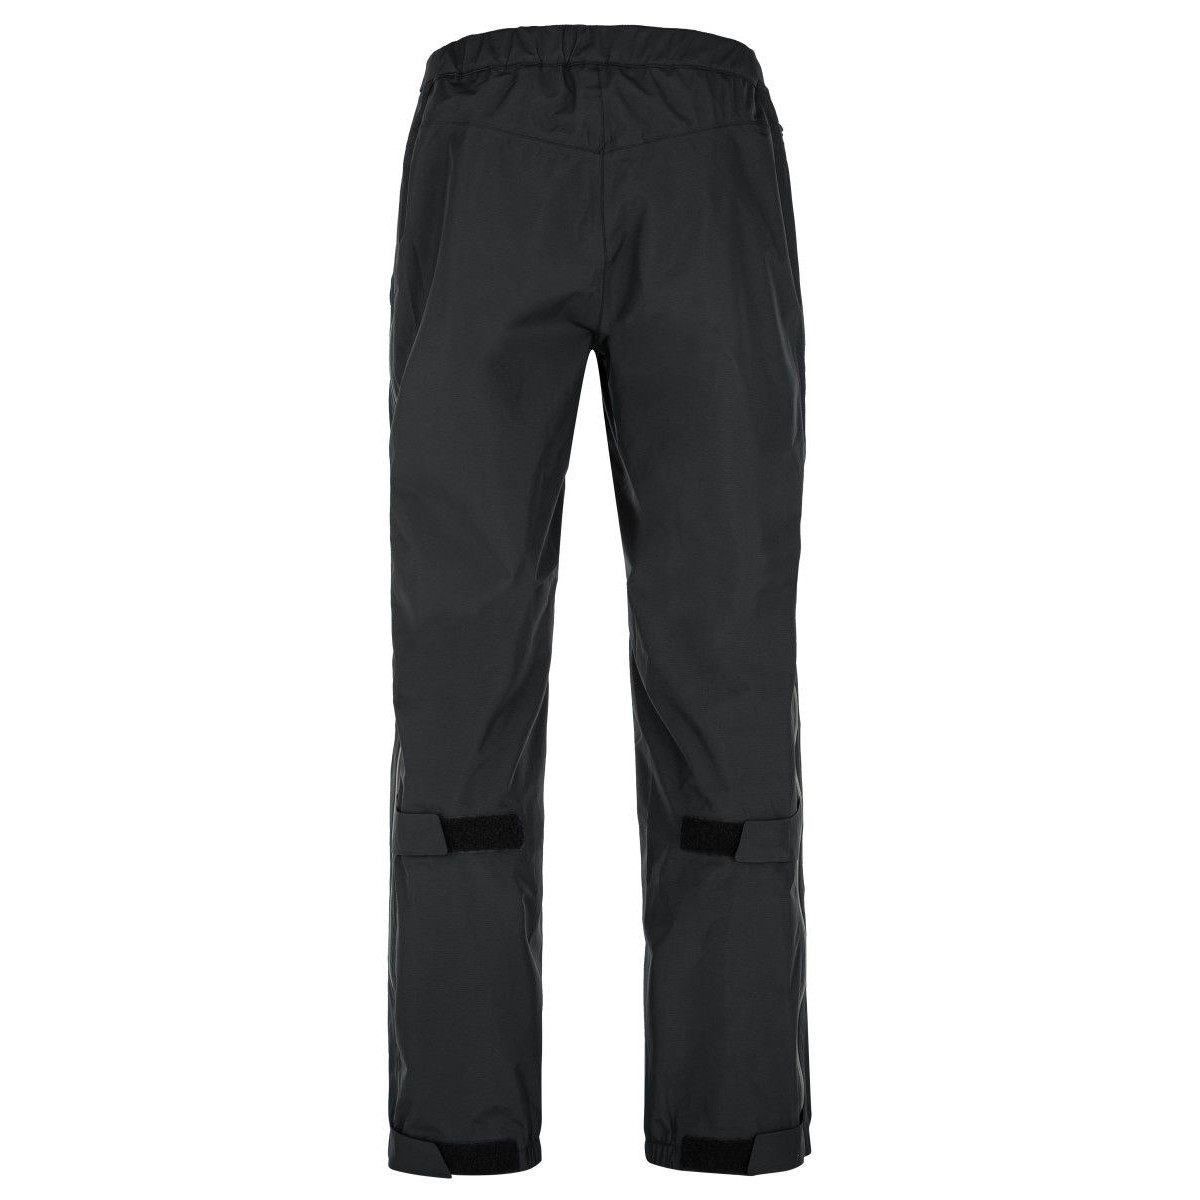 Men technology two layers outdoor waterproof pants N Alpin-M KILPI - view 2